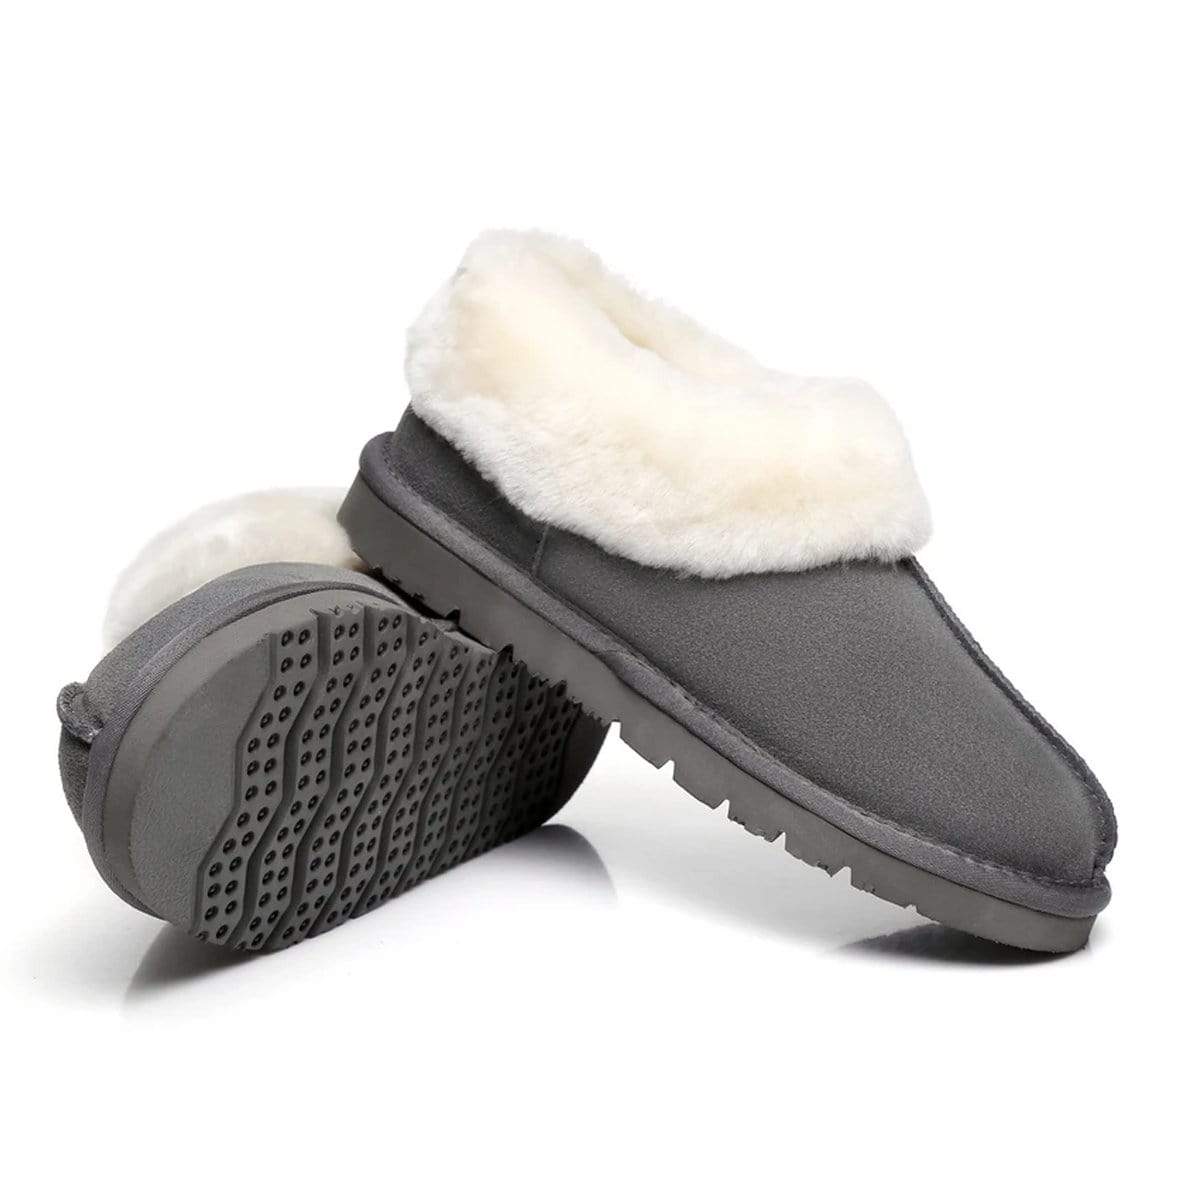 Premium Ankle UGG Slippers